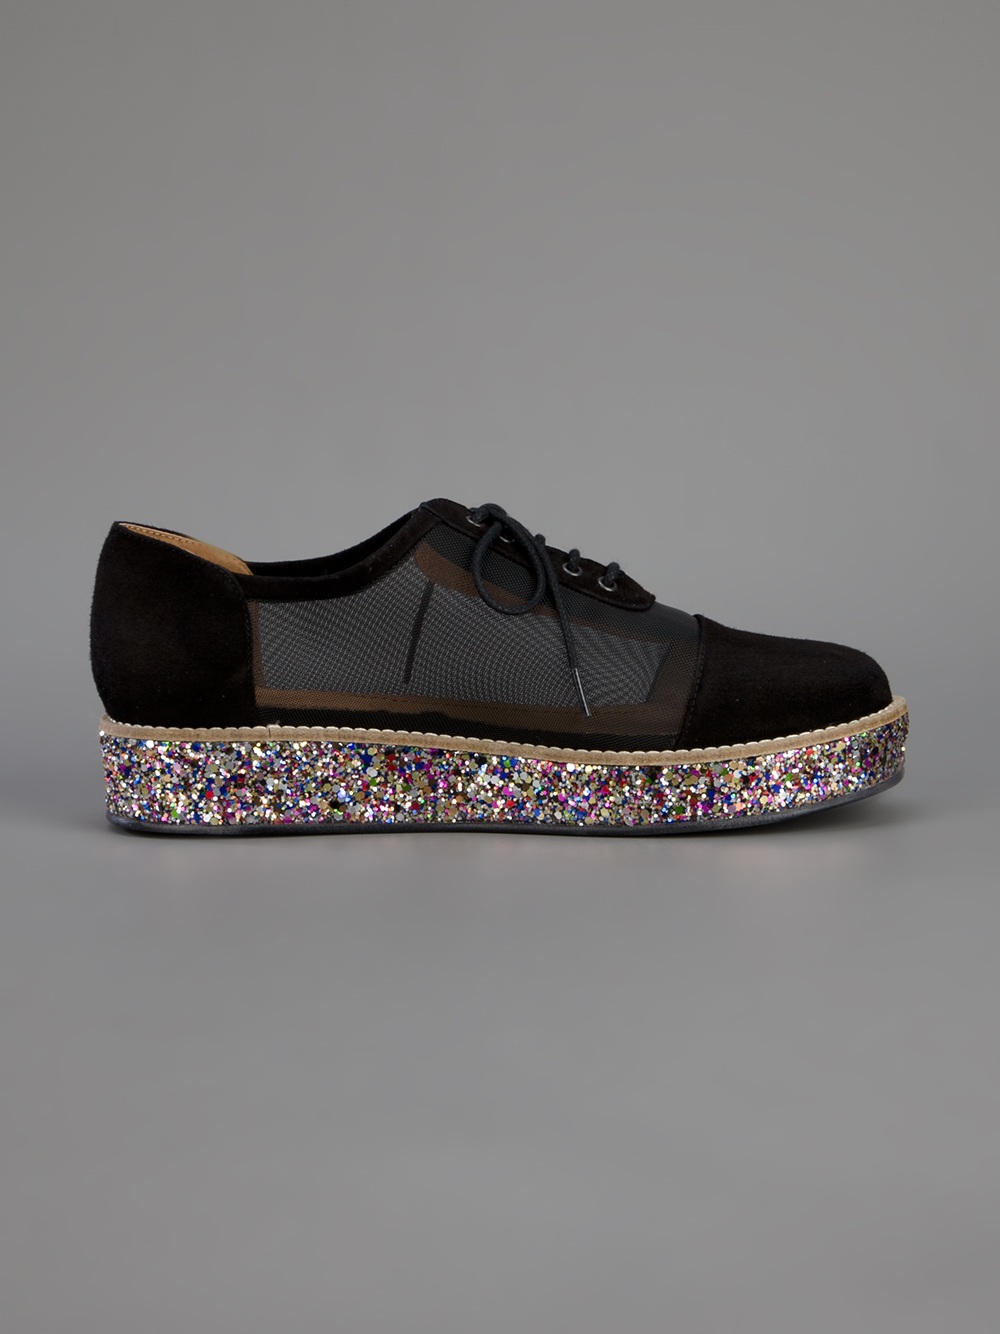 Low Plateau with Glitter Sole in Black 